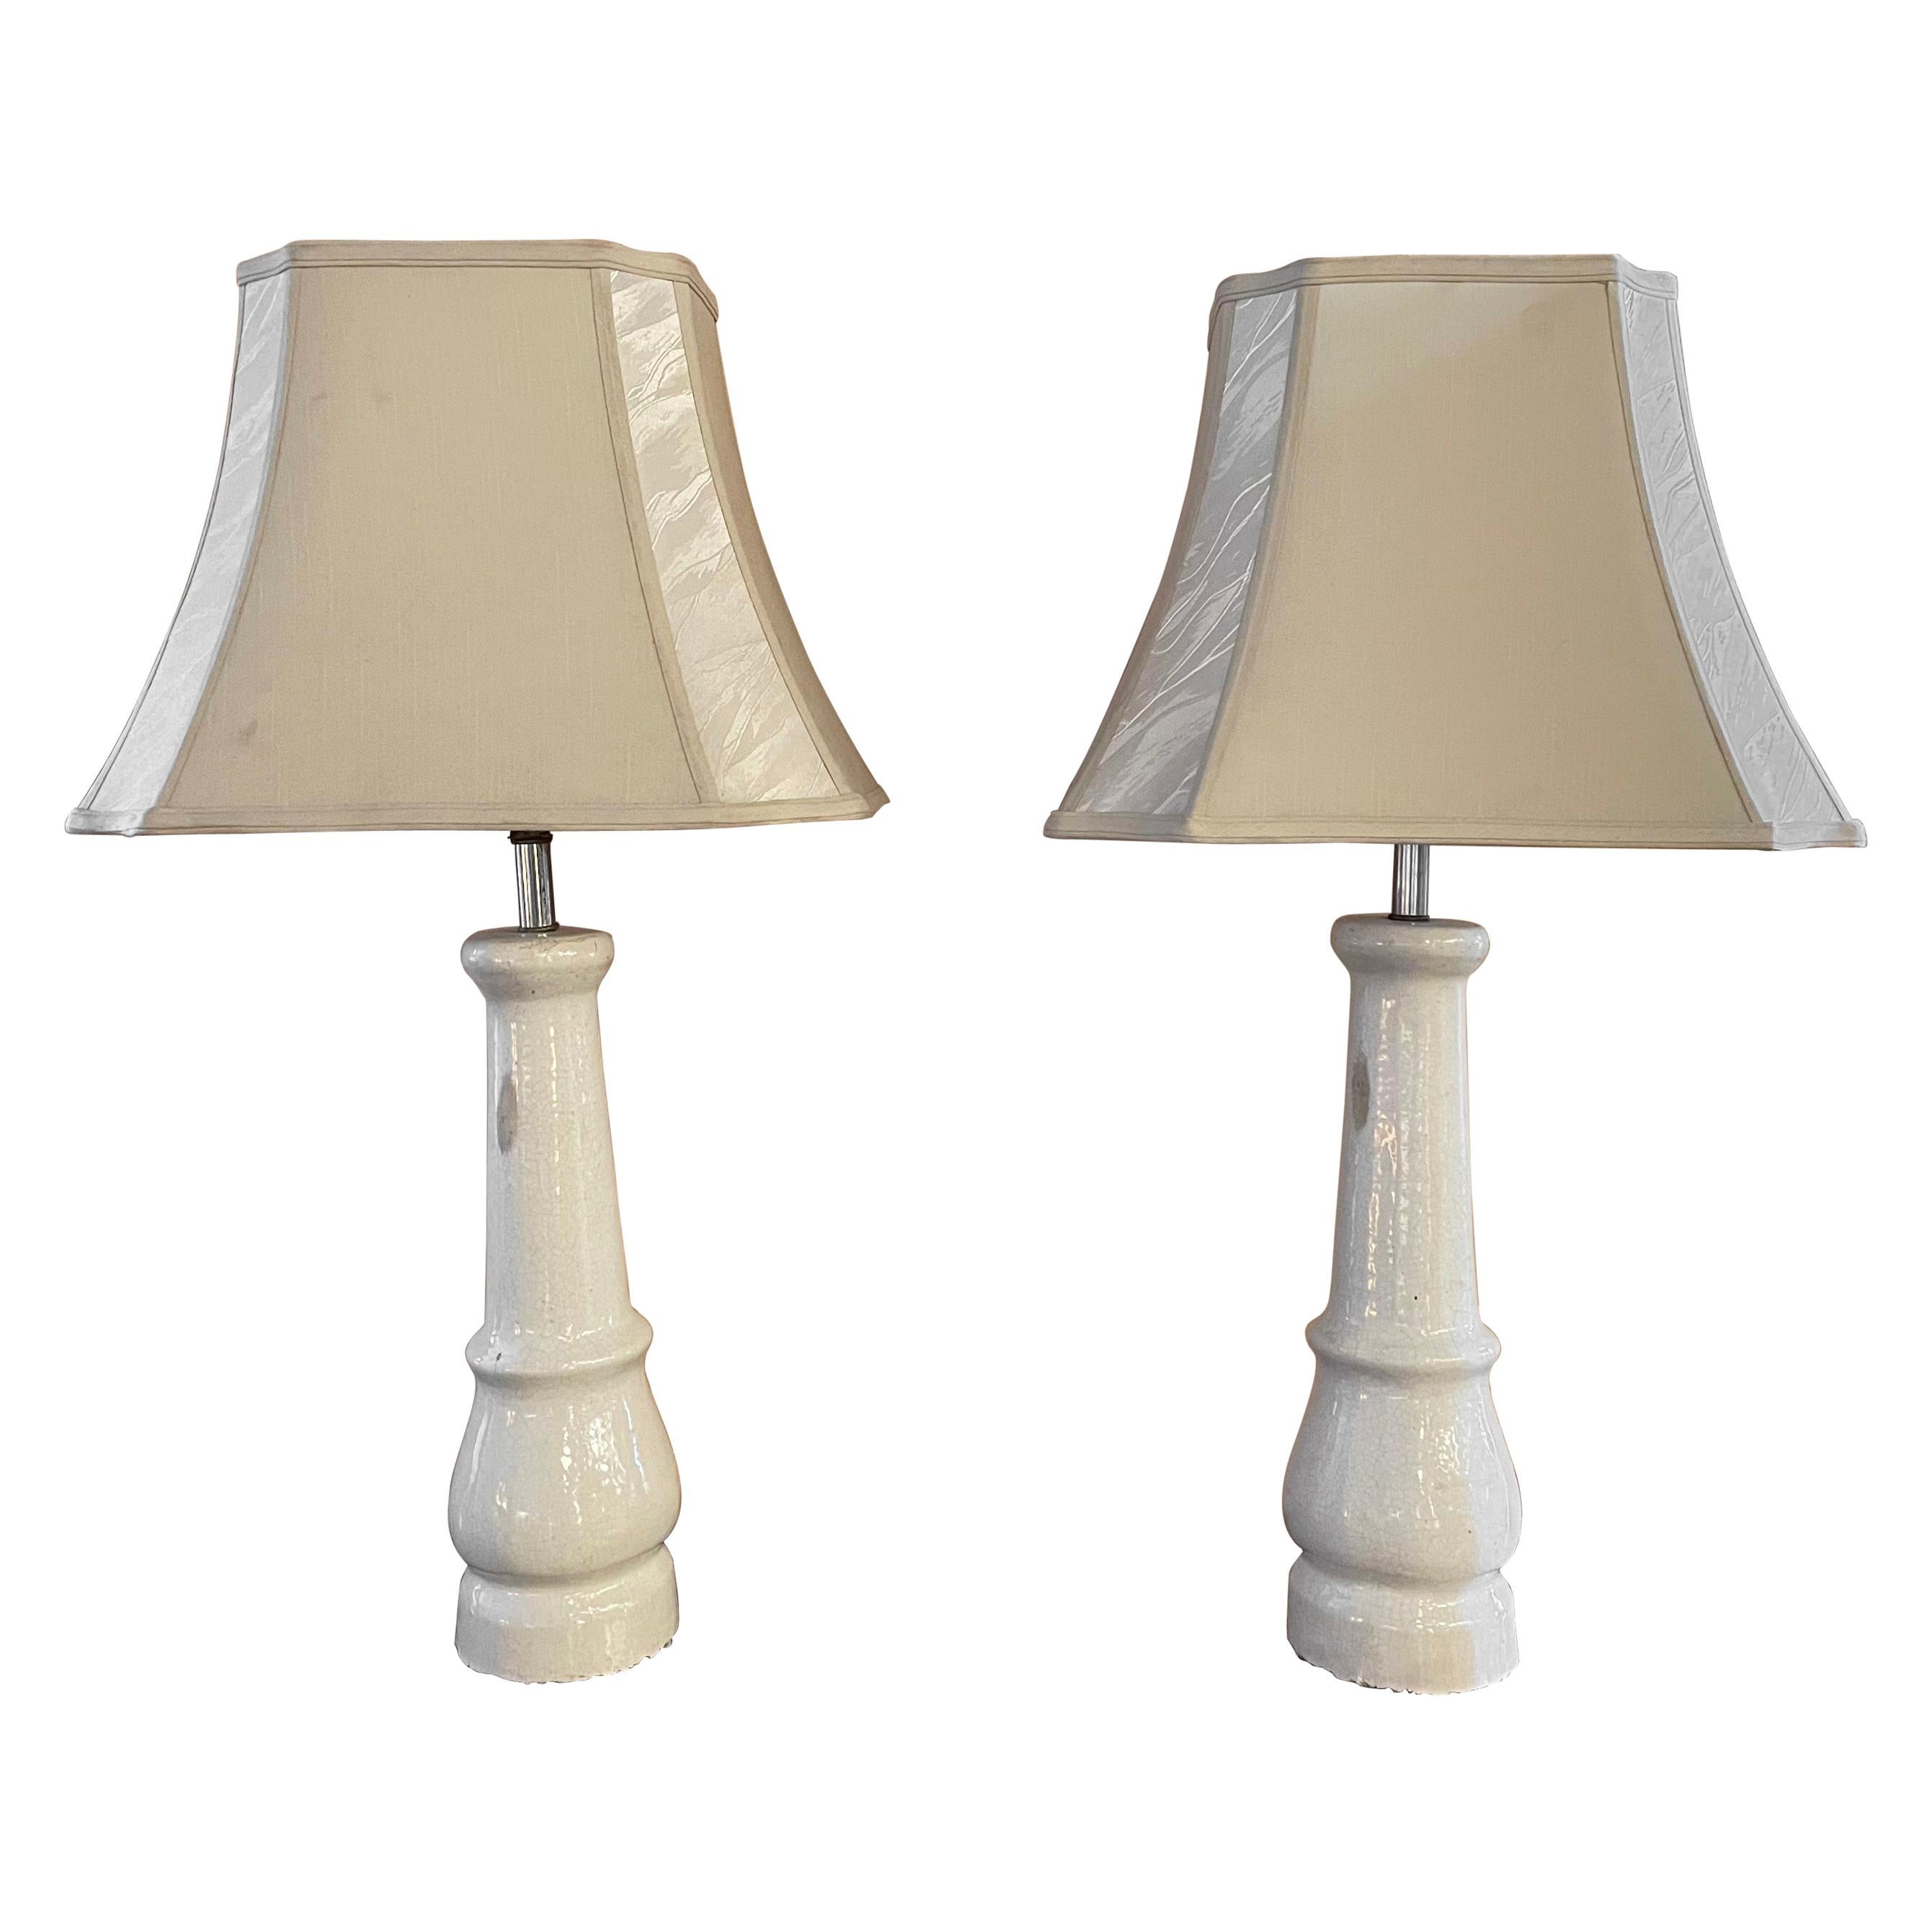 White Porcelain Leg Table Lamps with Shades